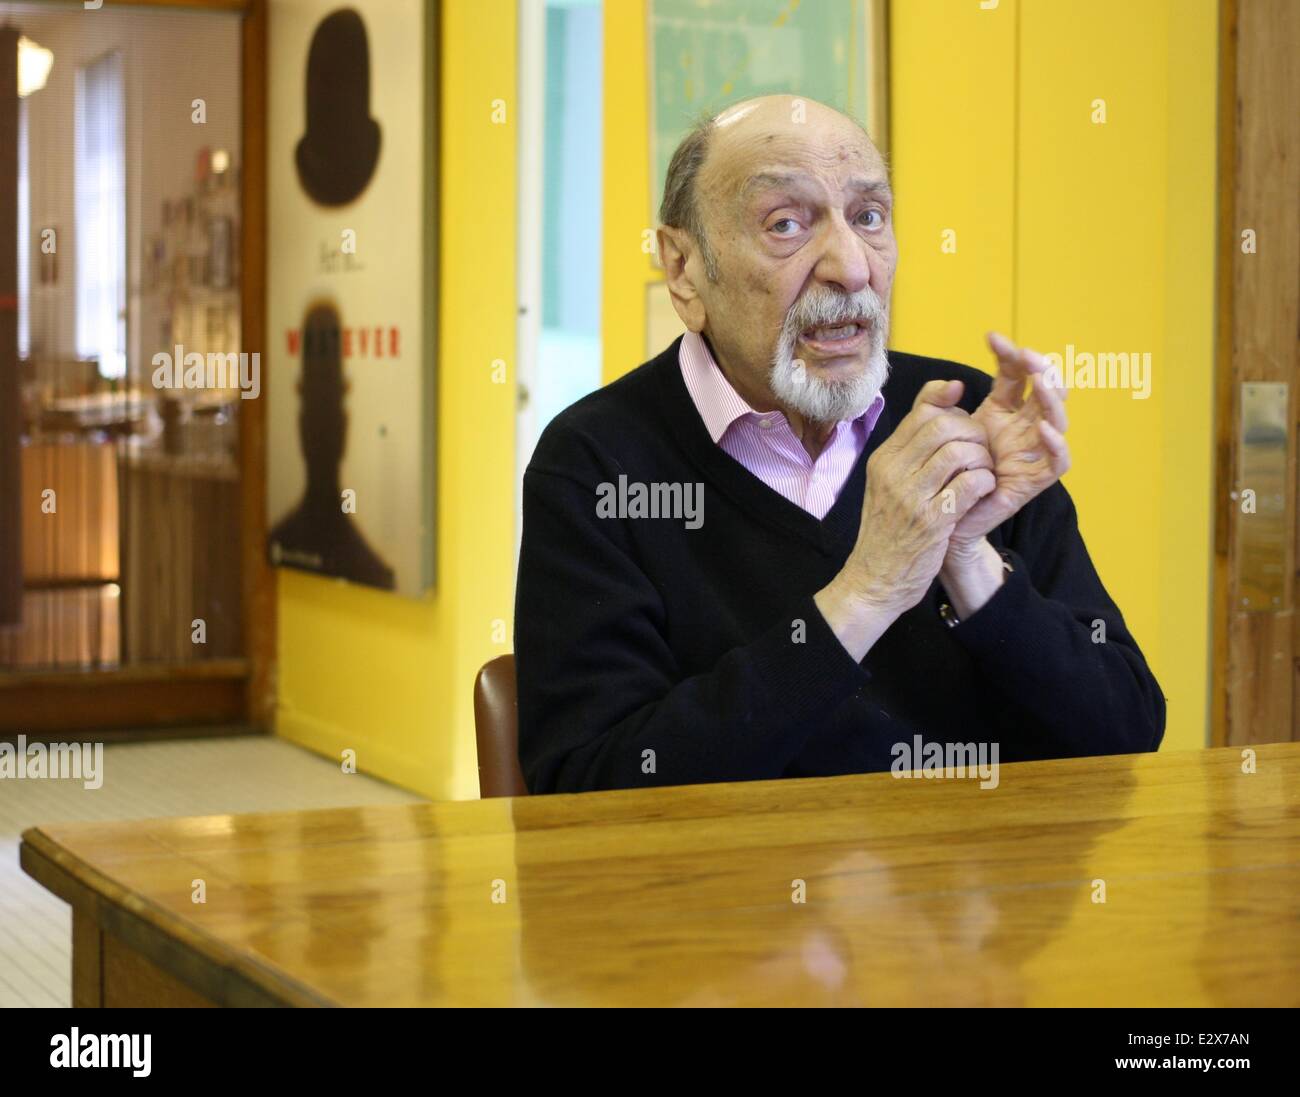 New York, USA. 20th May, 2014. US designer Milton Glaser speaks during an interview at his office in New York, USA, 20 May 2014. He is the creator of of the famouse and beloved 'I love New York' logo. The designe will turn 85 on 26 June 2014. Photo: CHRISTINA HORSTEN/dpa/Alamy Live News Stock Photo